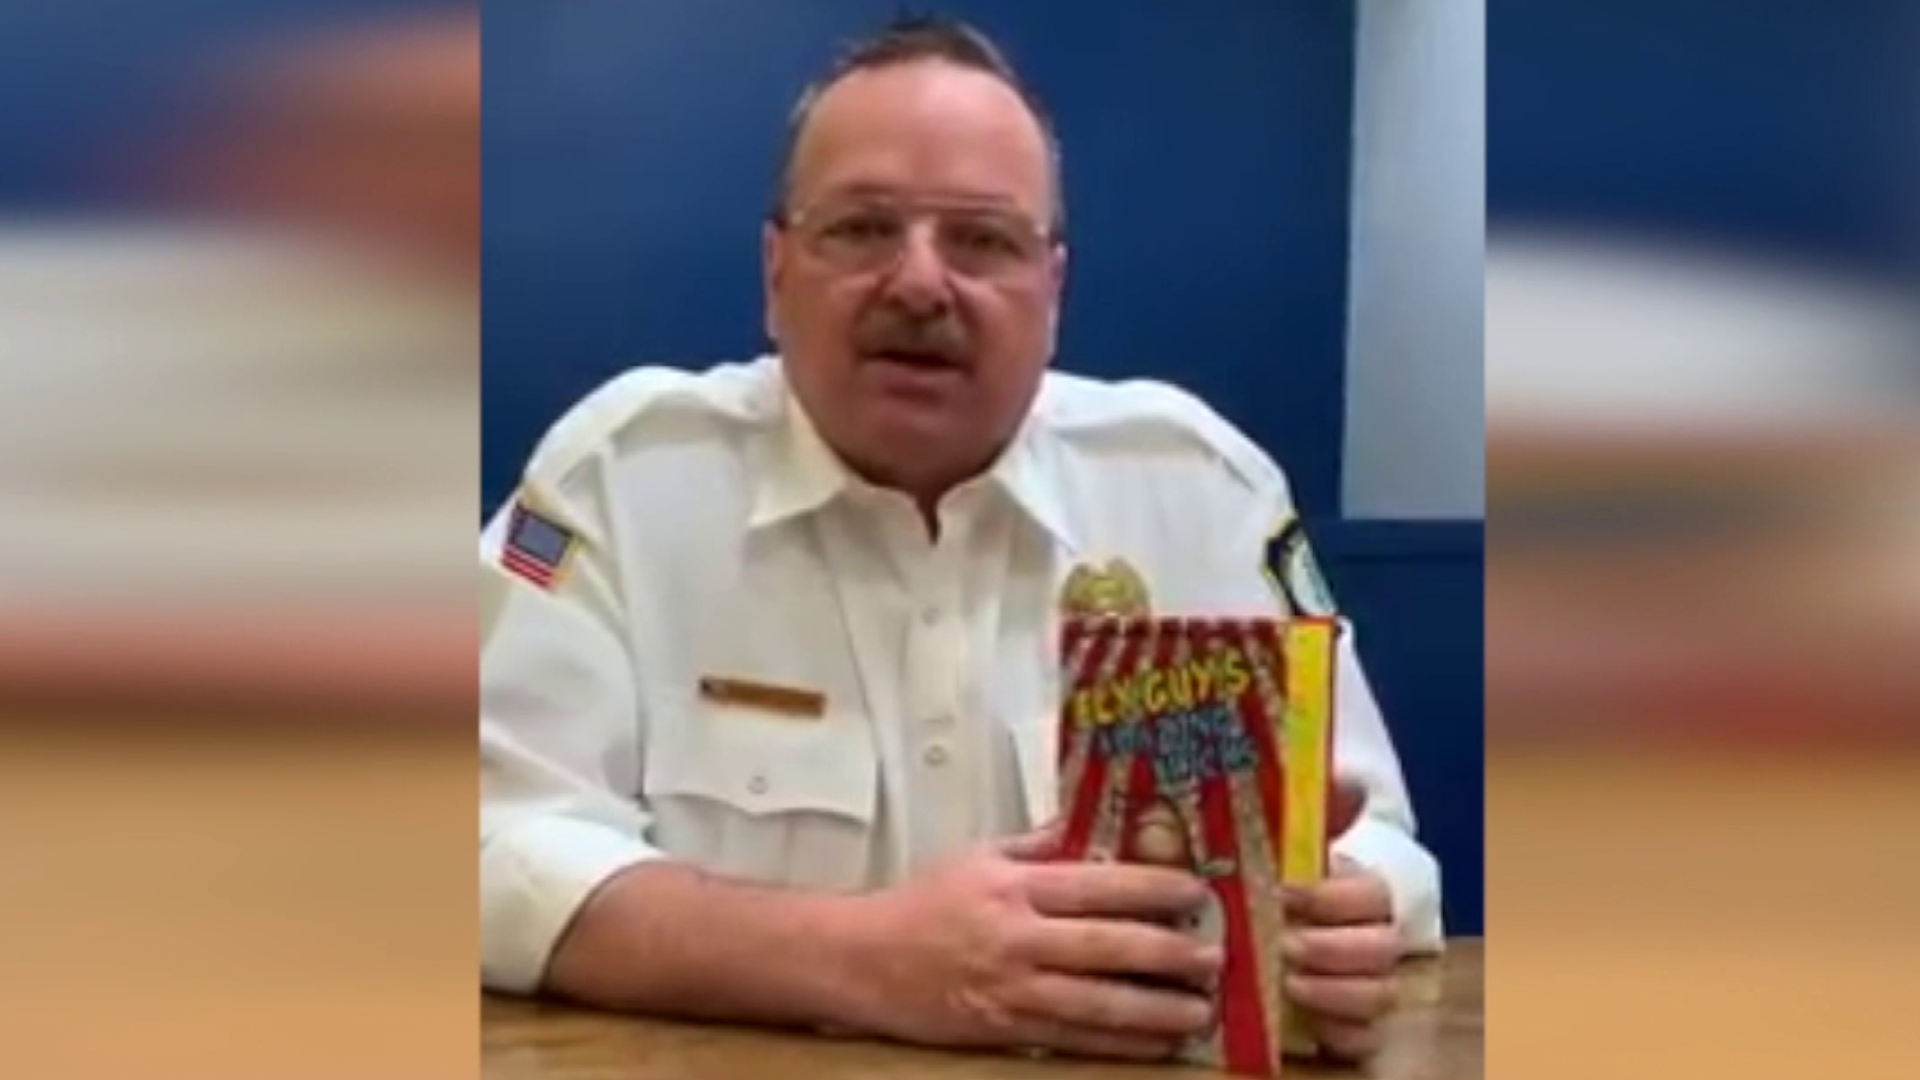 White Haven Police Chief Thomas Szoke says throughout the Stay-at-Home order, officers will be taking turns reading and doing activities on Facebook.